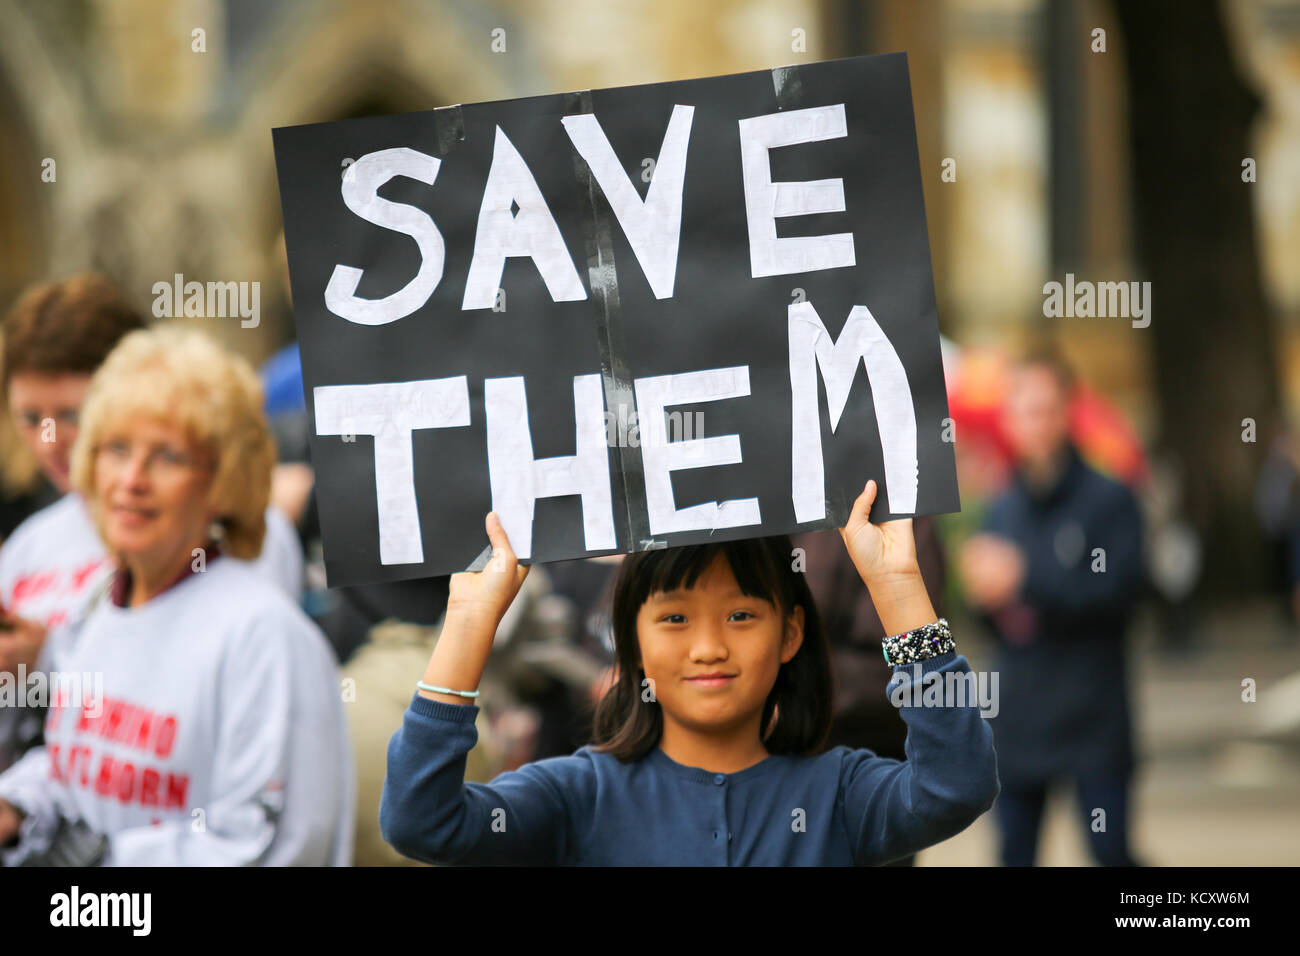 London, UK. 7th Oct, 2017. A silent protest in Parliament Square by GMFER, to focus on bringing awareness and adding pressure to the UK government to bring in a full ban on ivory, and to highlight the antiques industry which so shamefully fights to keep the ivory trade alive. Penelope Barritt/Alamy Live News Stock Photo